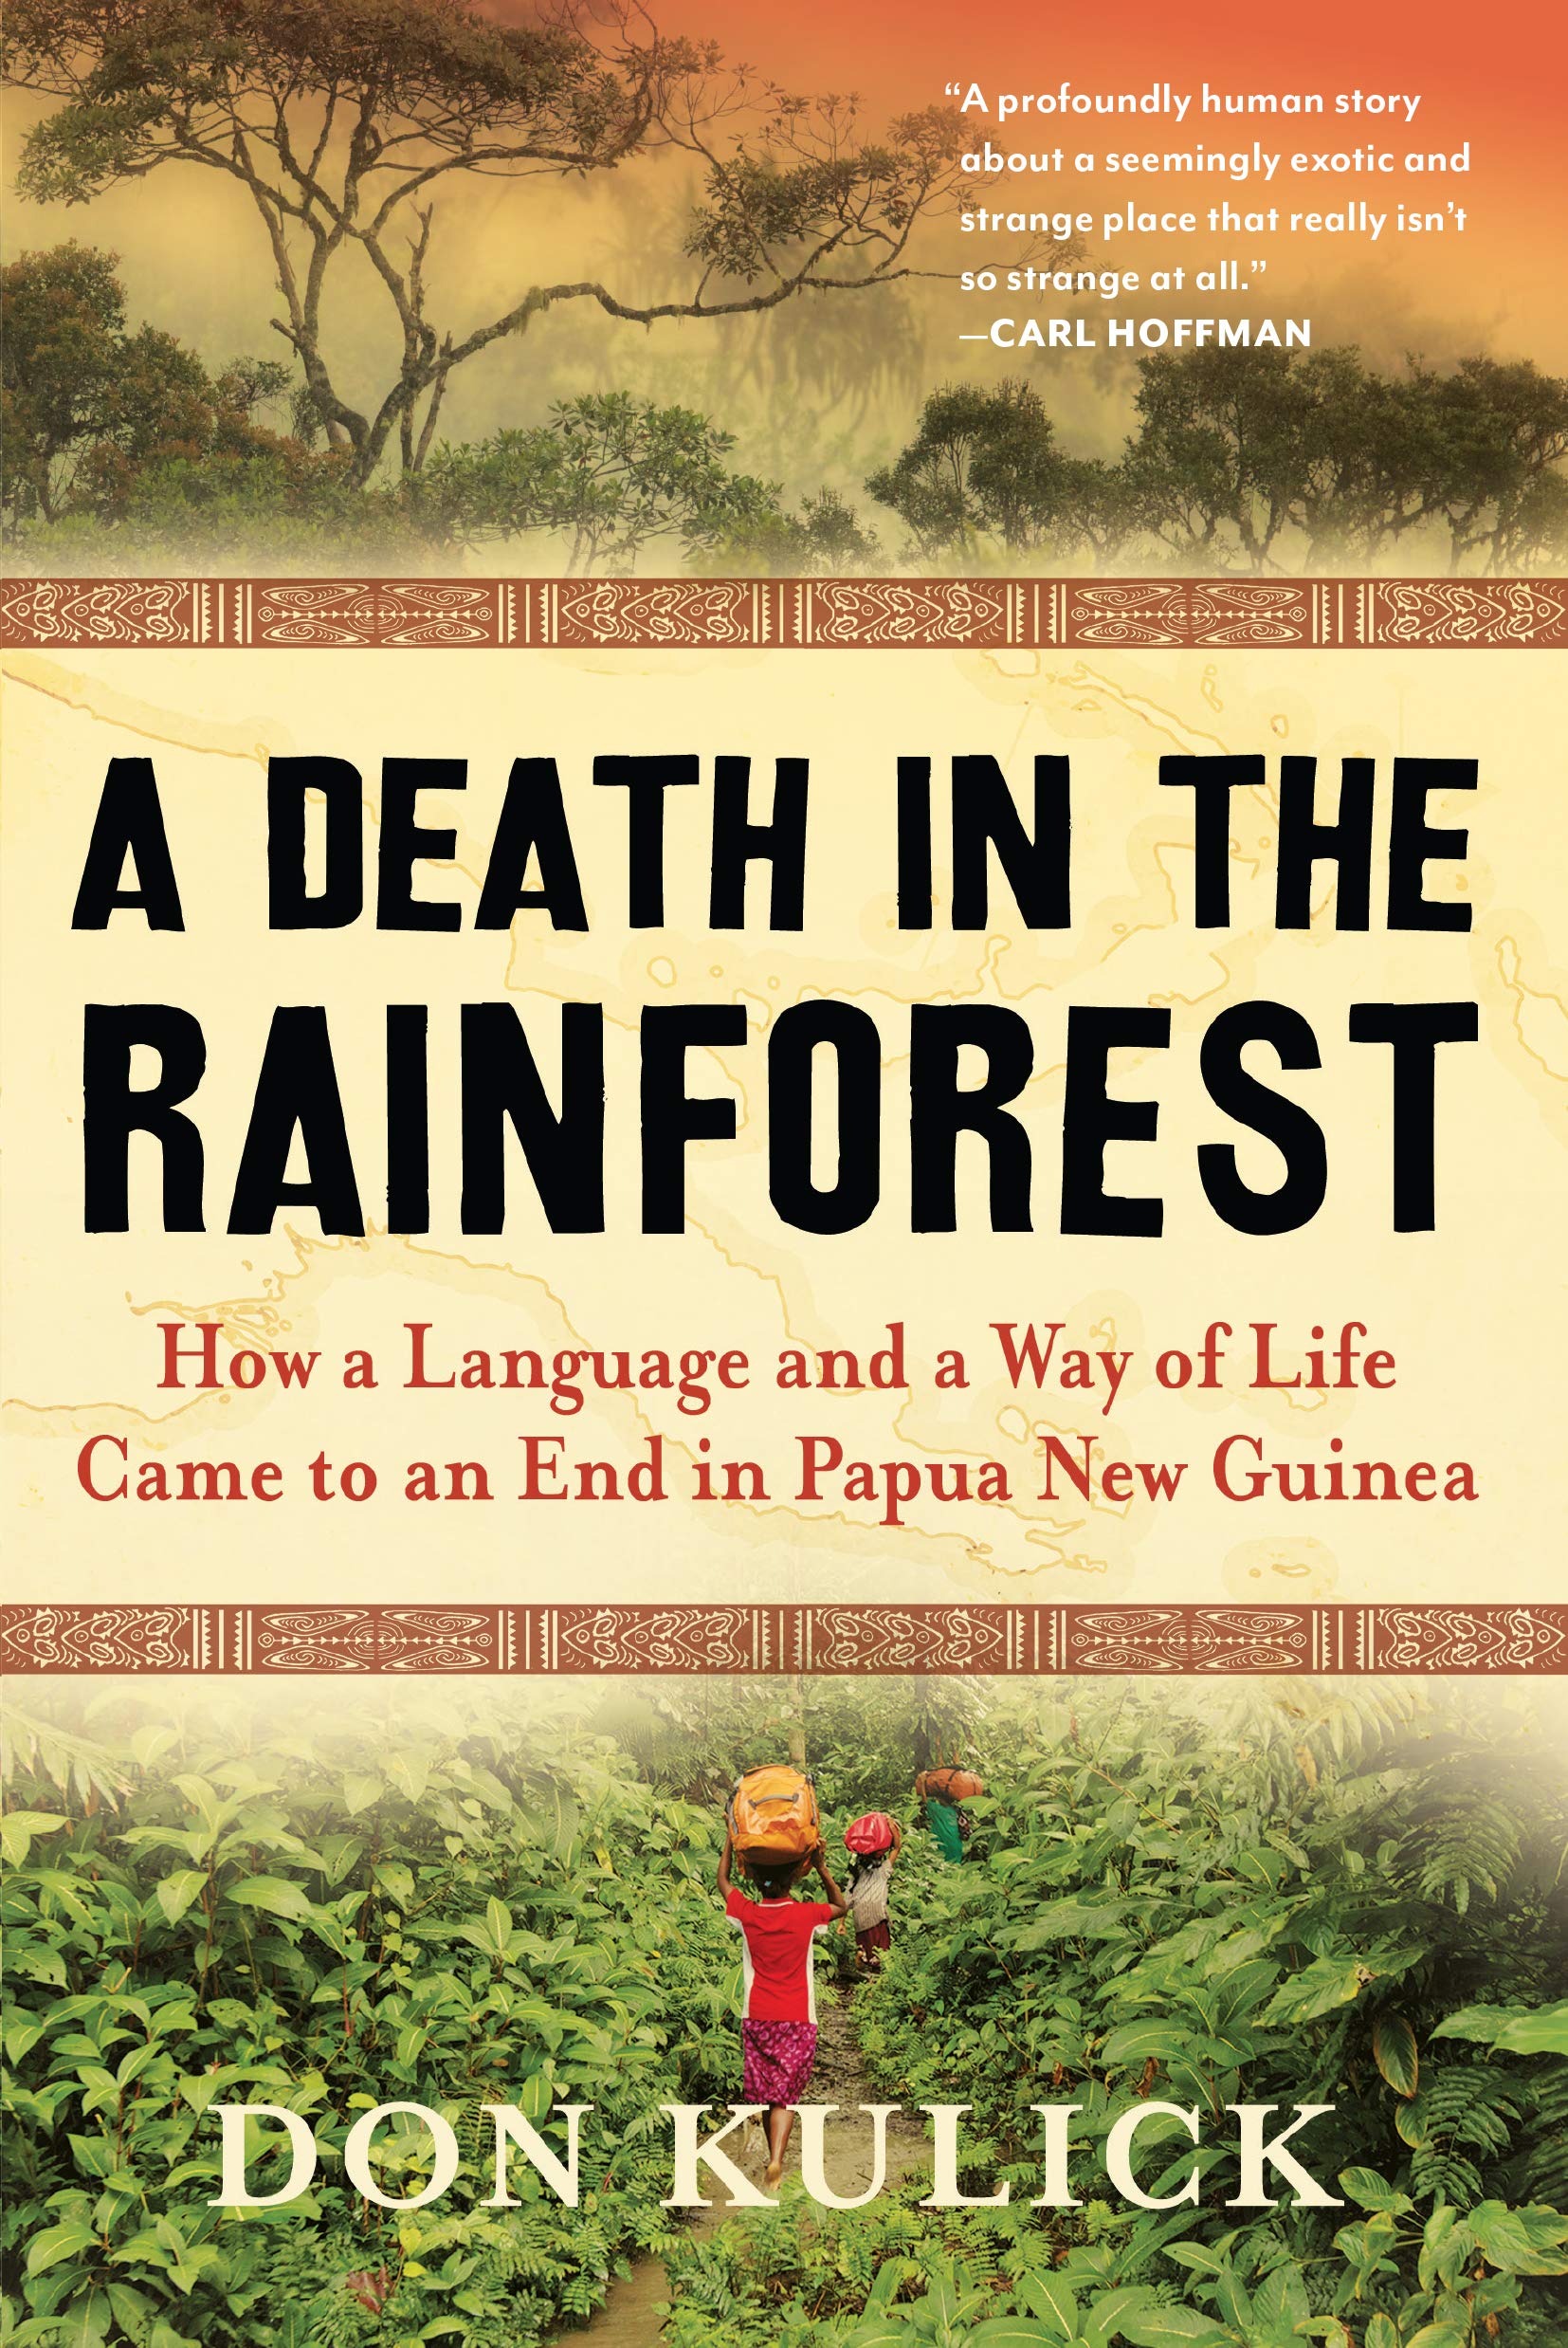 A Death in the Rainforest: How Language and a Way of Life Came to an End in Papua New Guinea